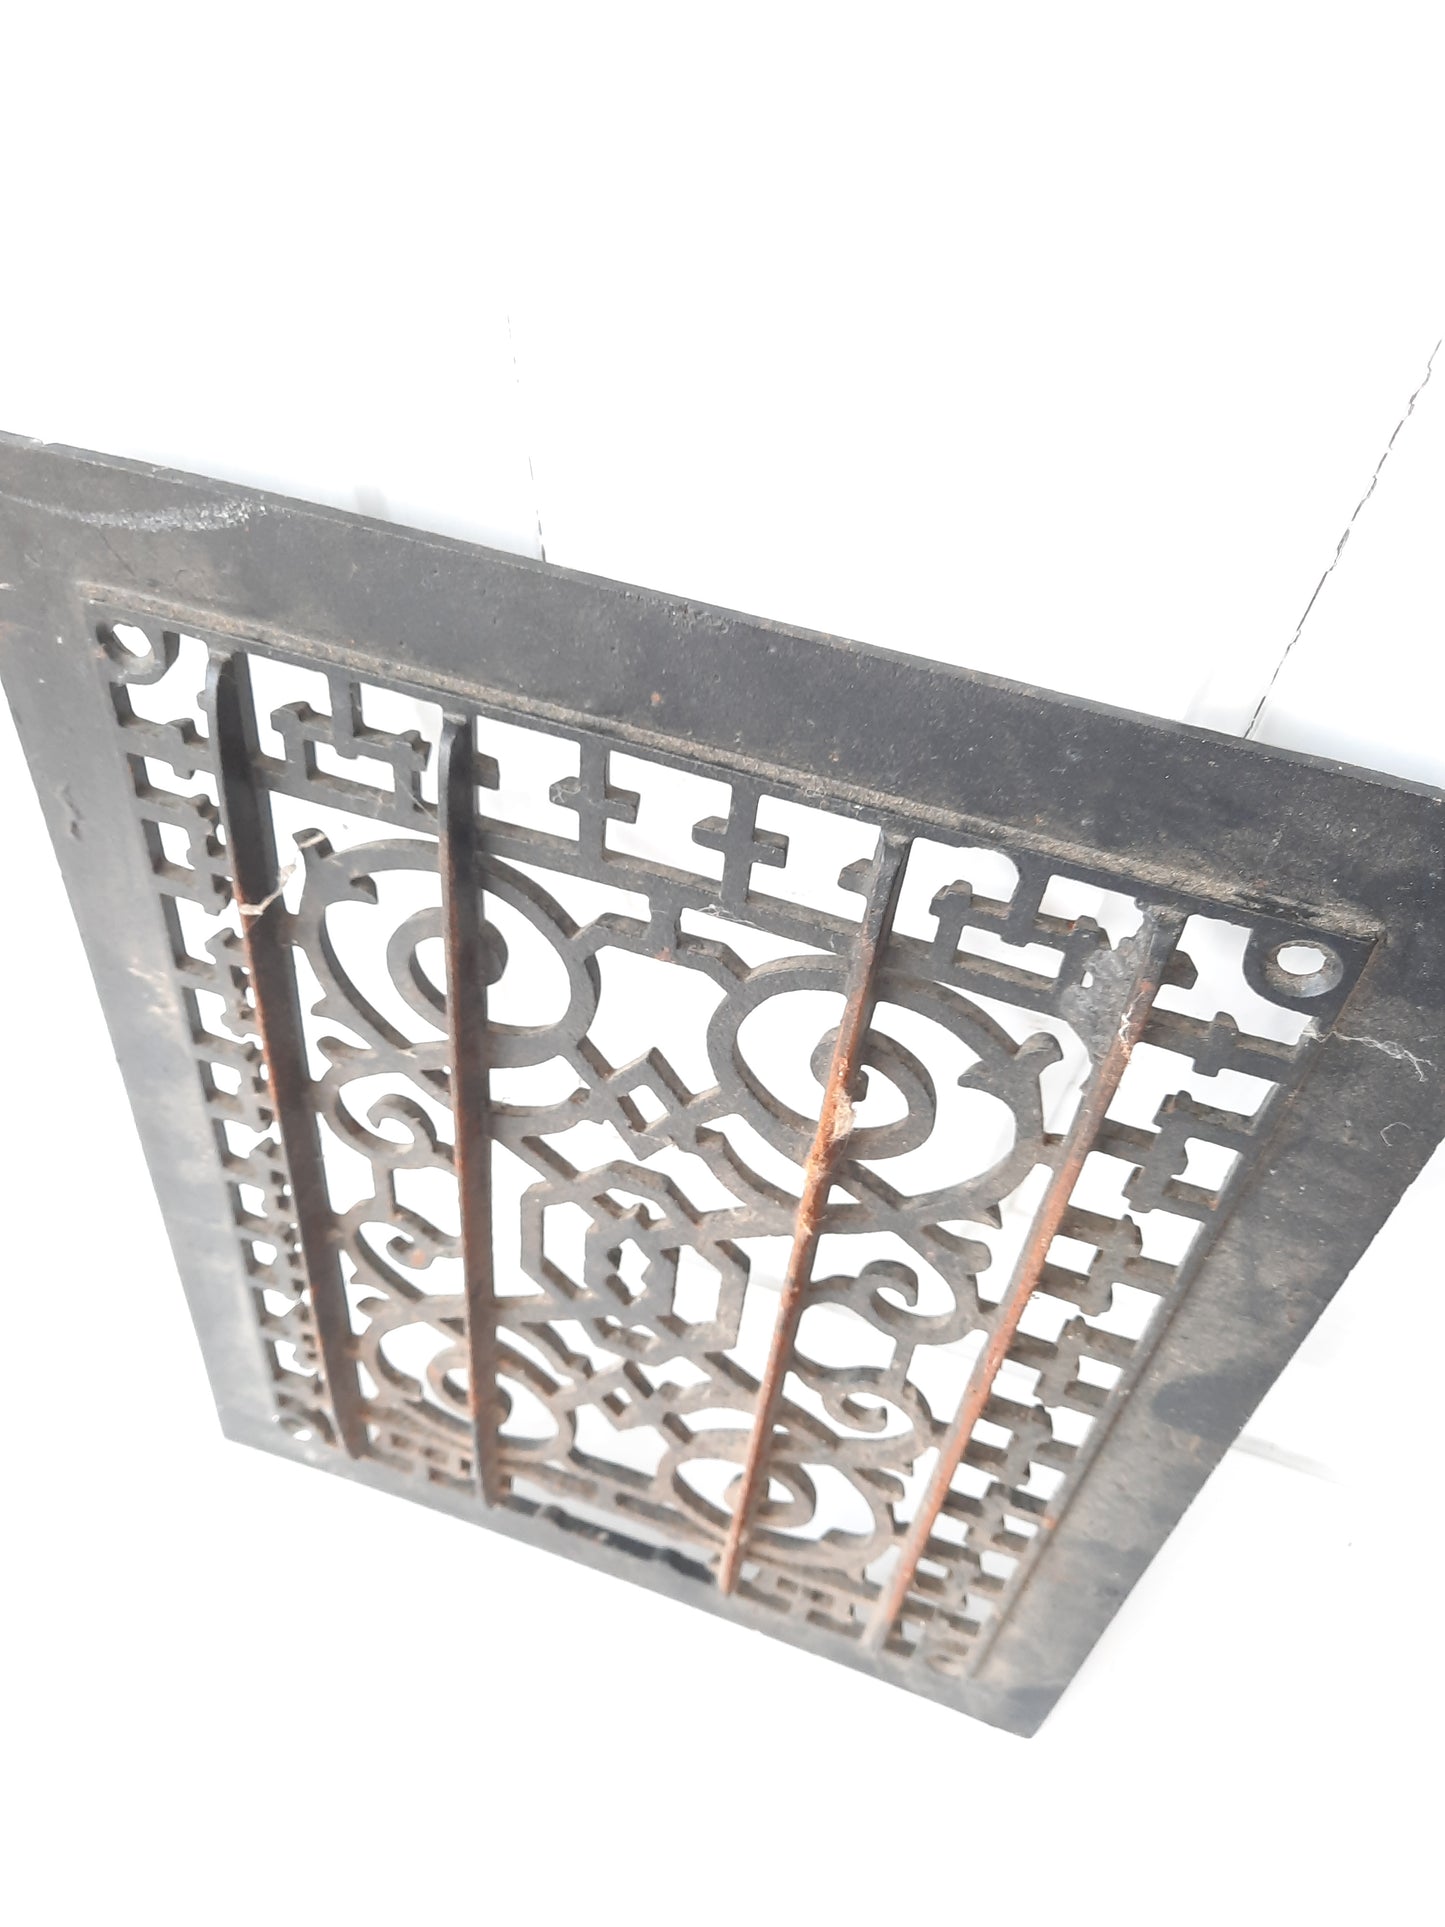 11 x 14 Antique Cast Iron Vent Cover, Floor or Wall Mount Heat Register Grate #111603